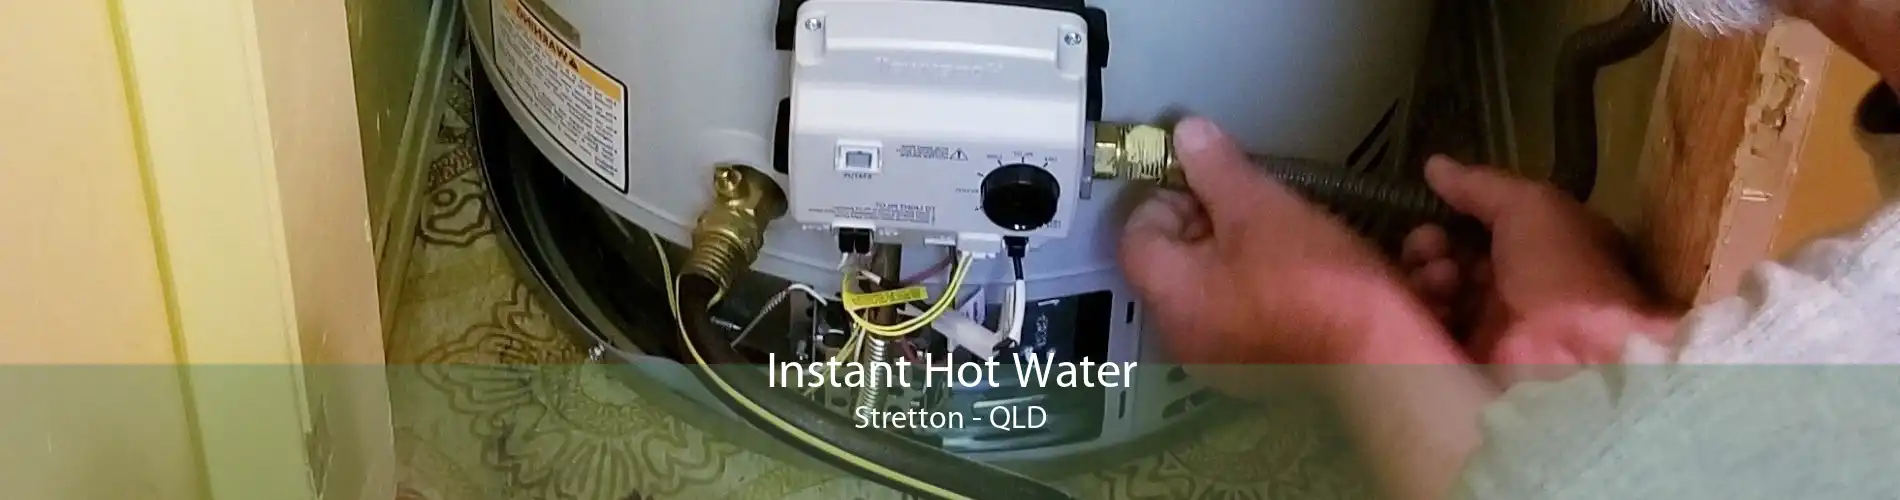 Instant Hot Water Stretton - QLD